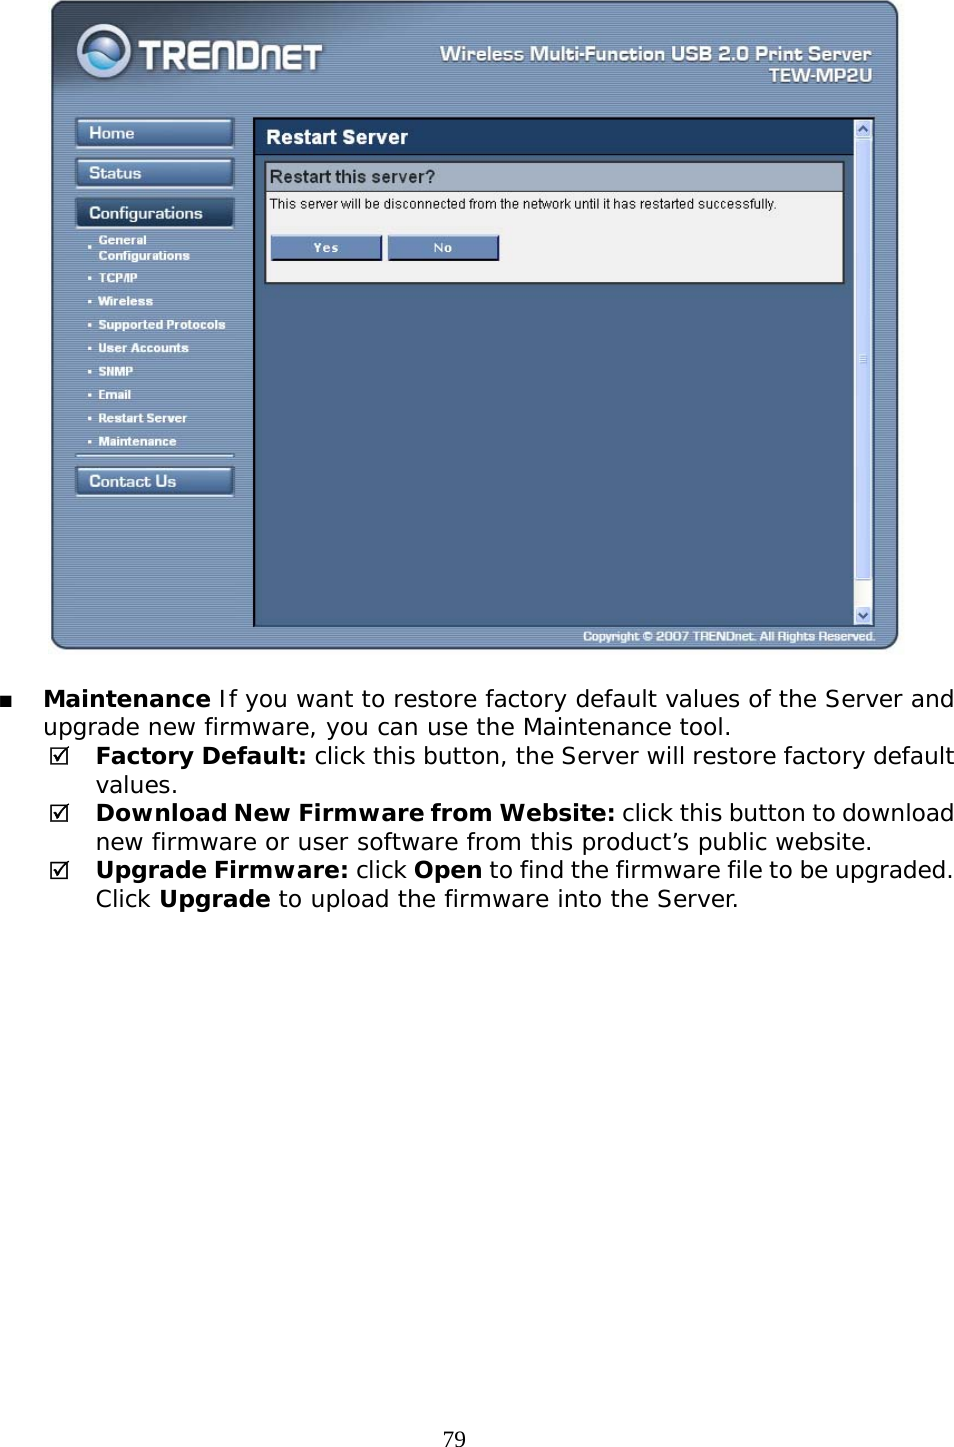     79   Maintenance If you want to restore factory default values of the Server and upgrade new firmware, you can use the Maintenance tool. 5 Factory Default: click this button, the Server will restore factory default values. 5 Download New Firmware from Website: click this button to download new firmware or user software from this product’s public website. 5 Upgrade Firmware: click Open to find the firmware file to be upgraded. Click Upgrade to upload the firmware into the Server.  